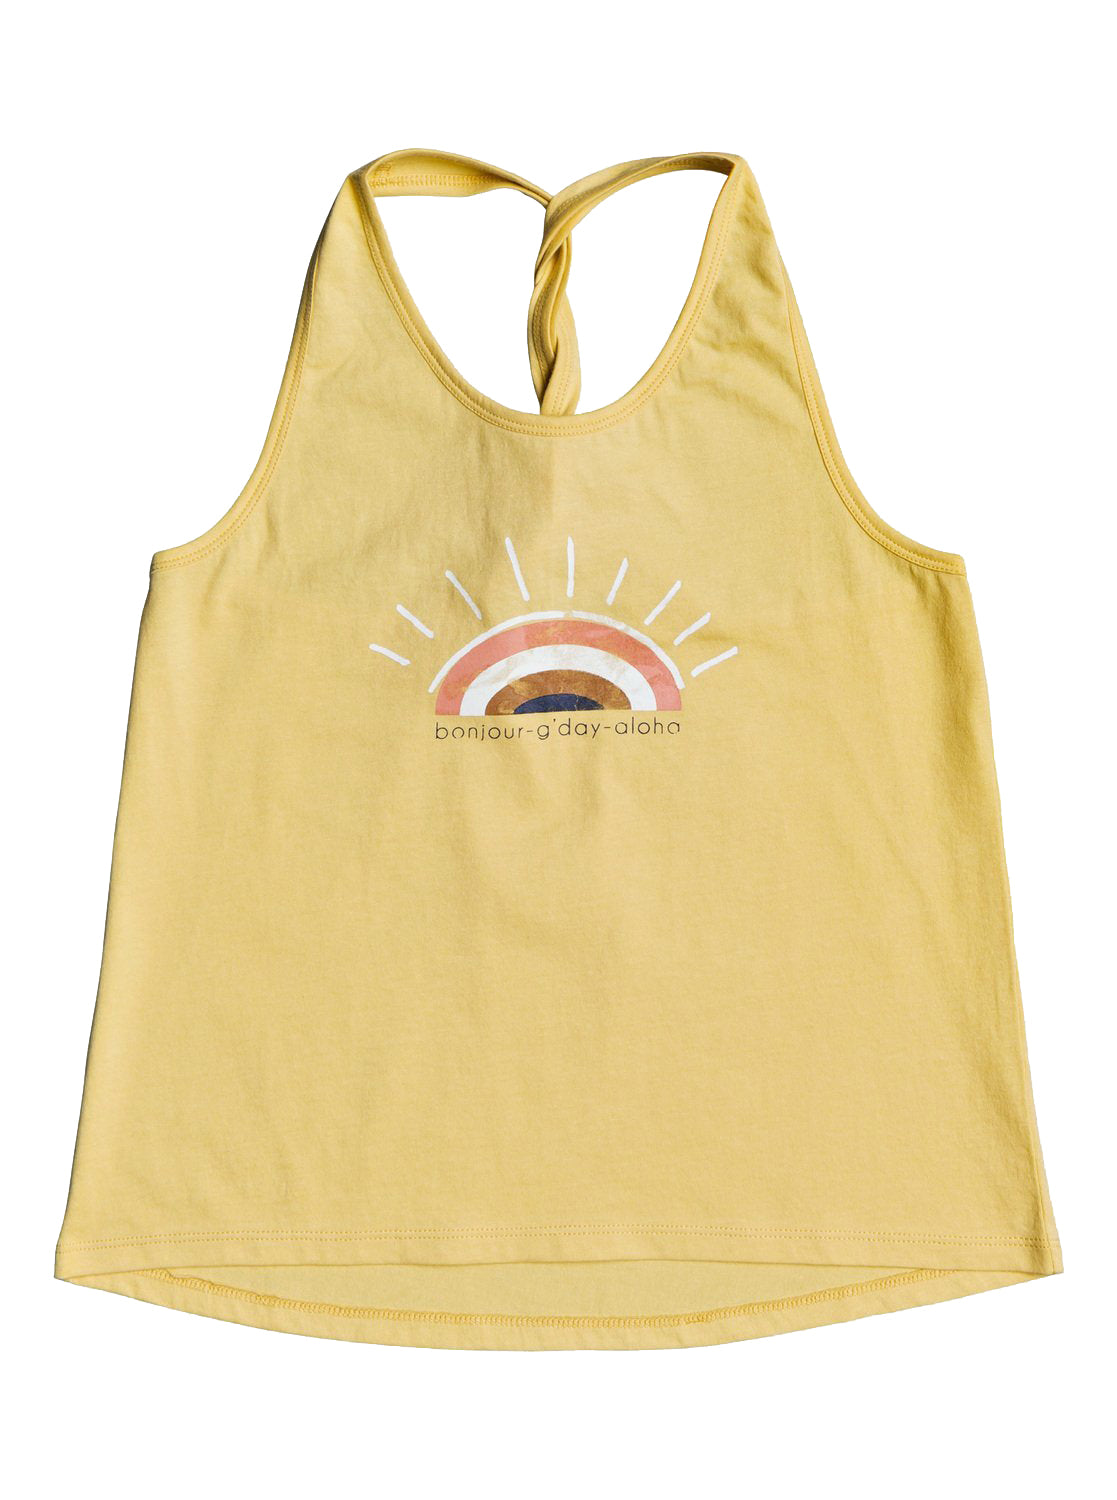 Roxy Wish You The Best Girls Tank Top YGD0 12/L